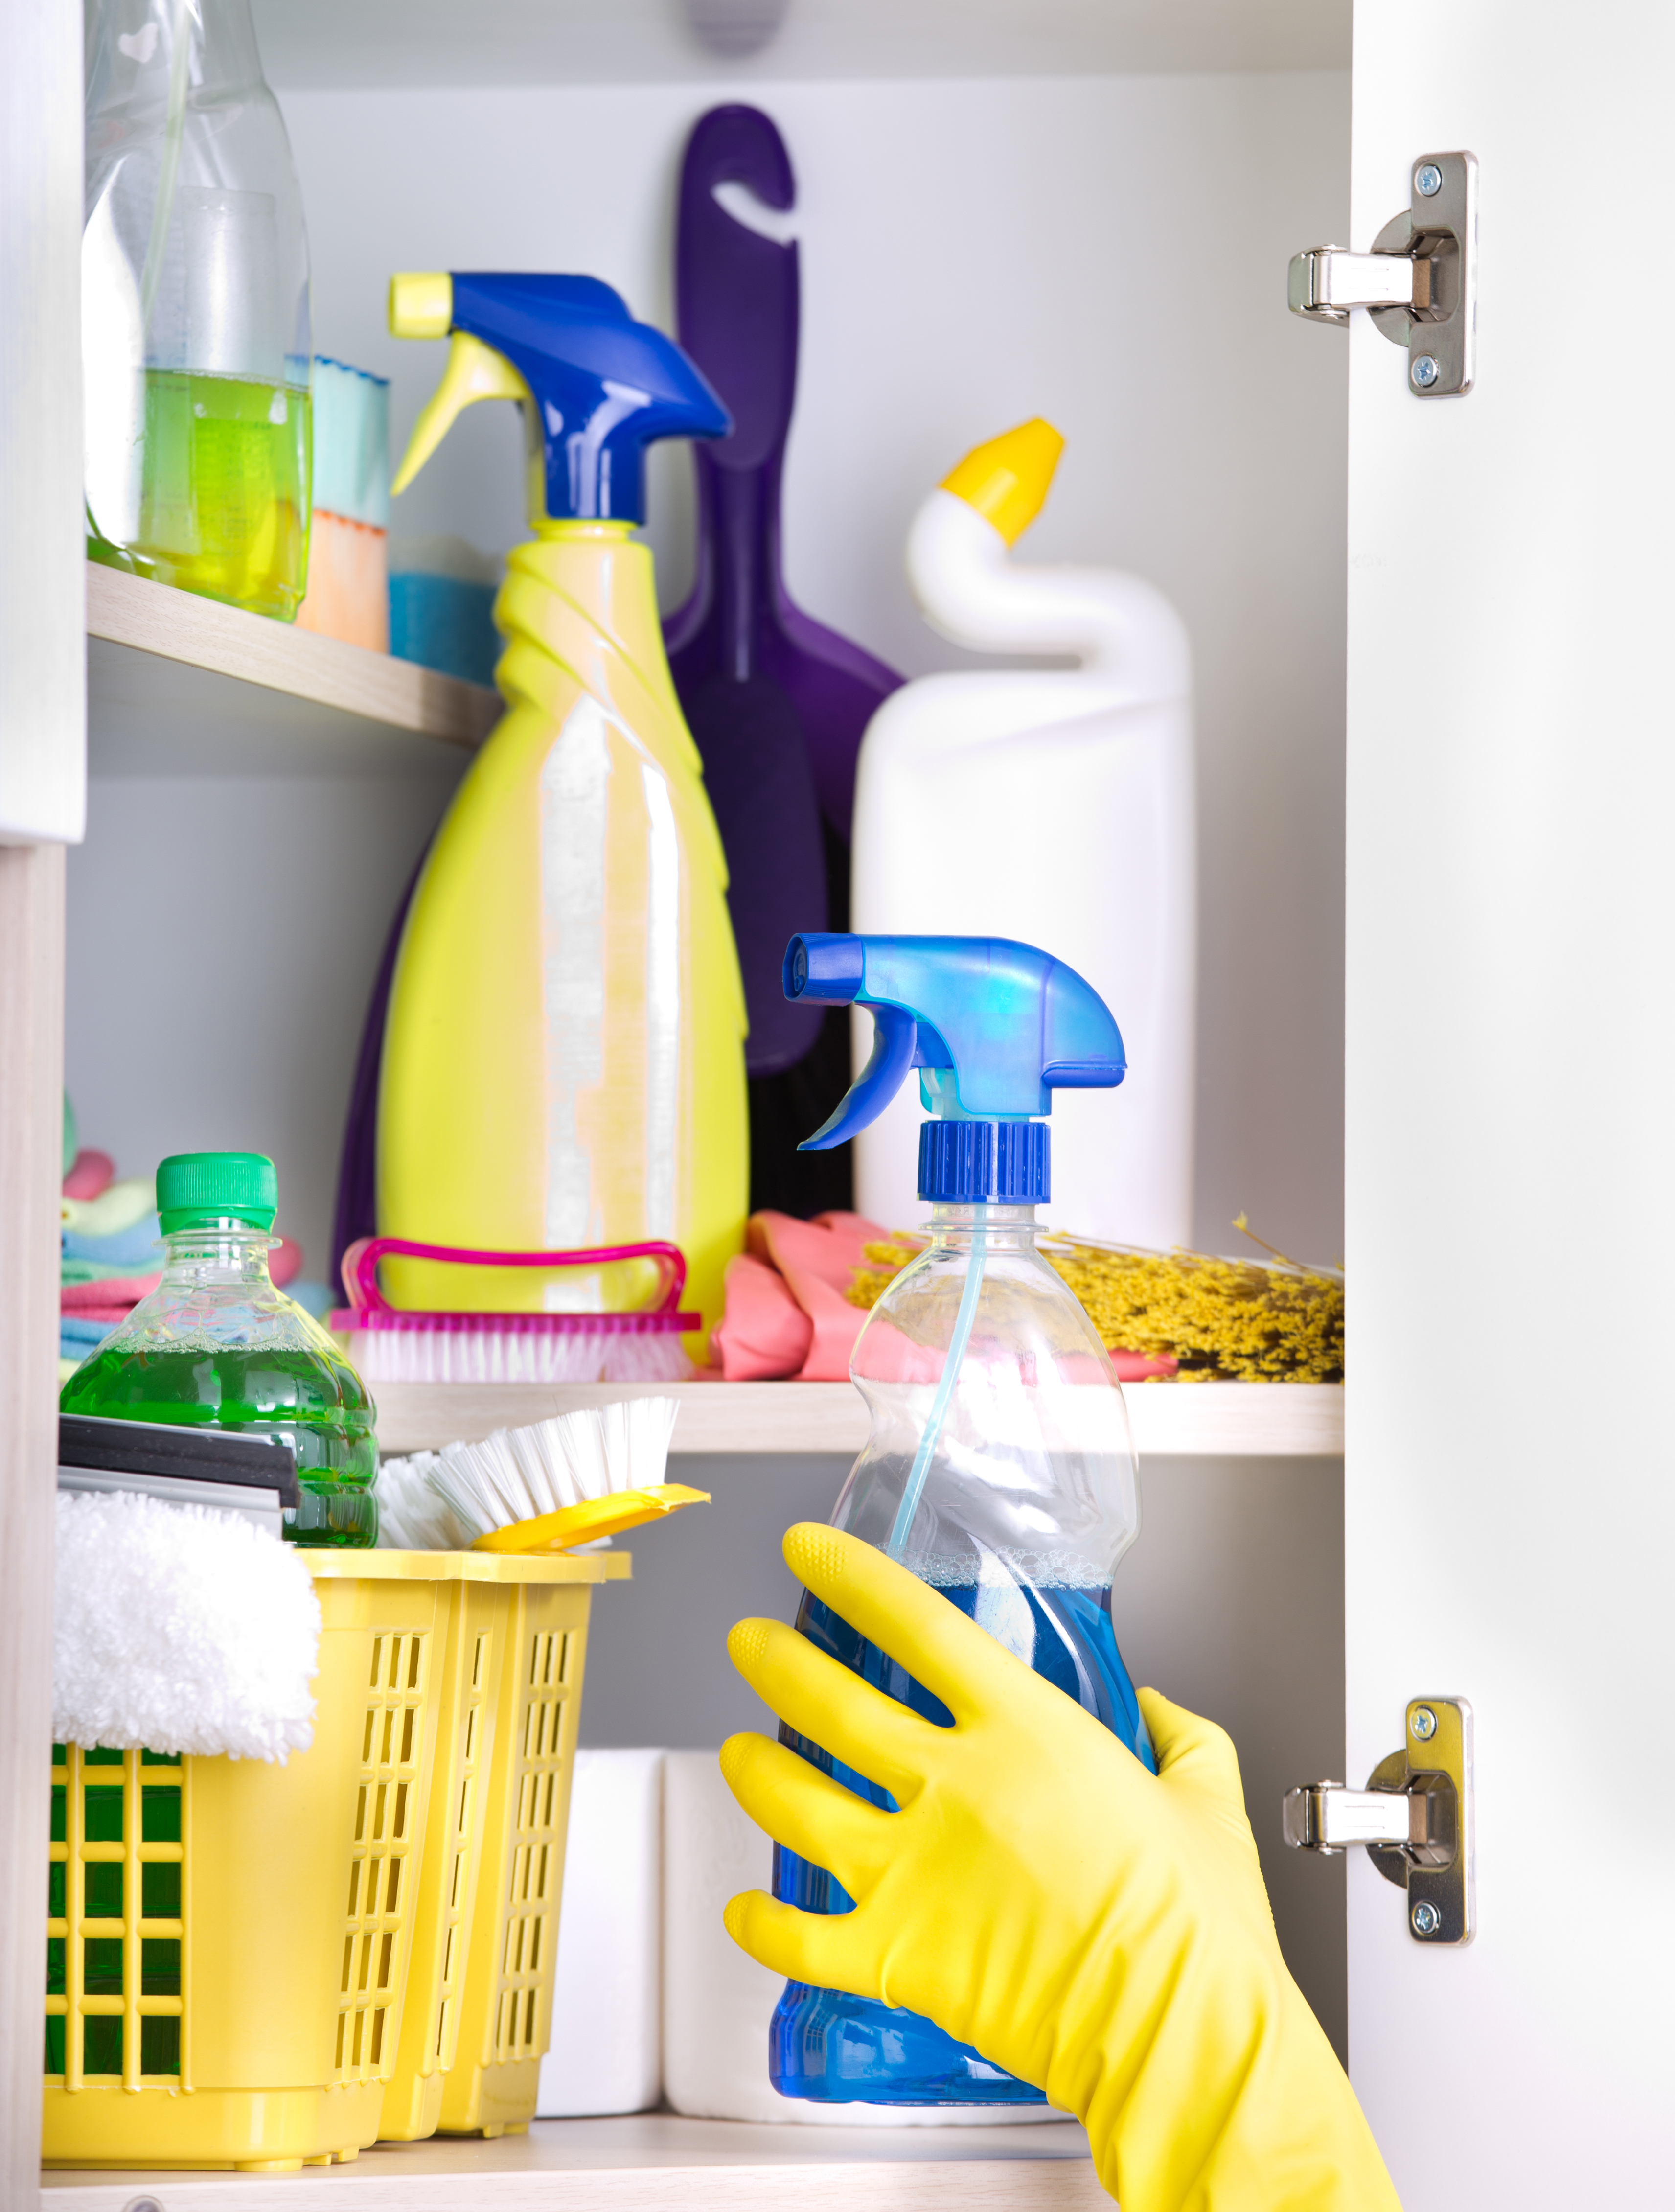 Cleaning products on a shelf with a hand covered in a rubber glove grabbing one